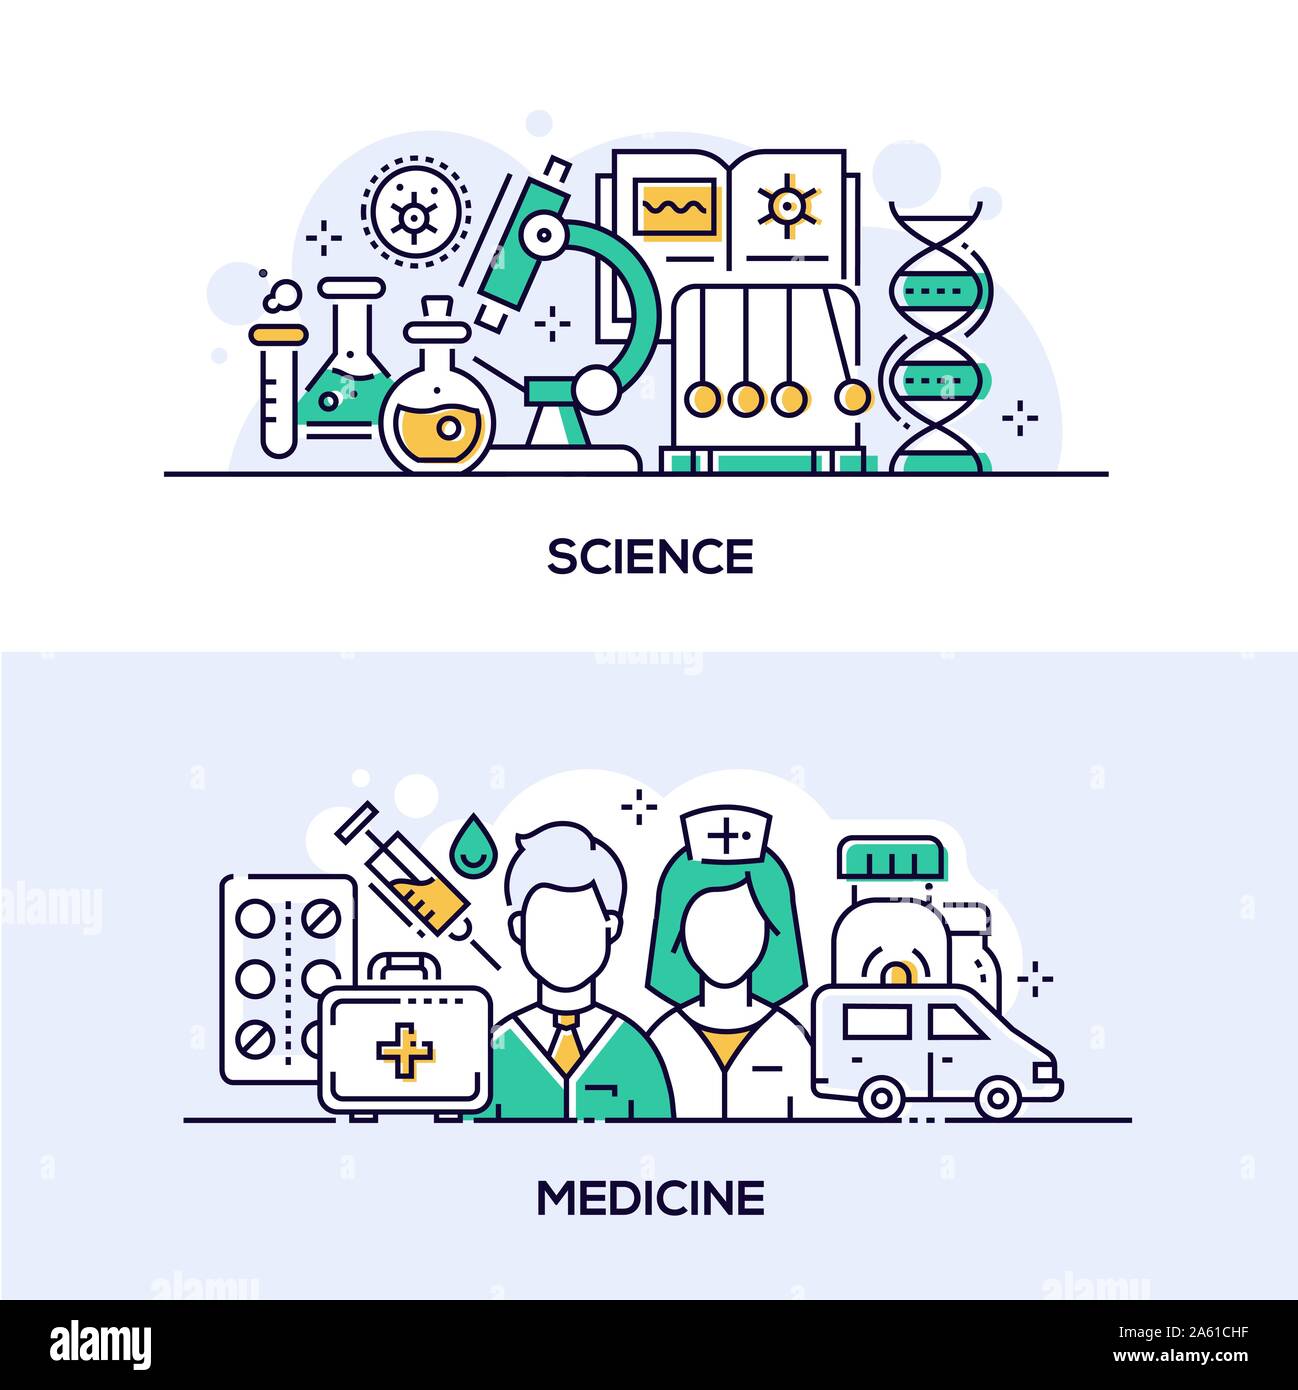 Modern science and medicine banner templates set Stock Vector